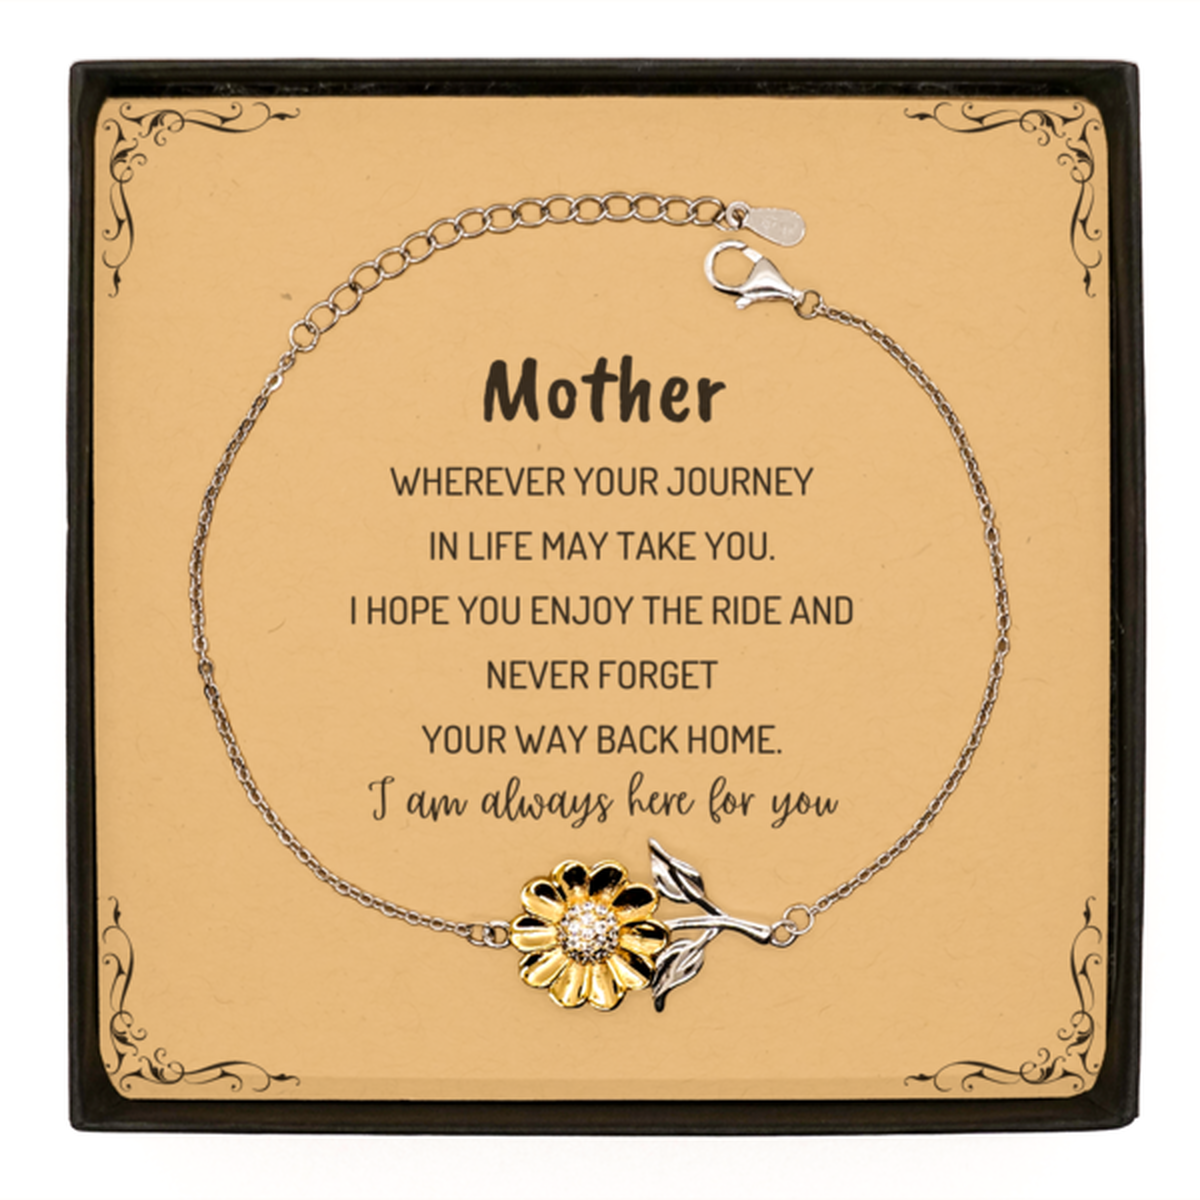 Mother wherever your journey in life may take you, I am always here for you Mother Sunflower Bracelet, Awesome Christmas Gifts For Mother Message Card, Mother Birthday Gifts for Men Women Family Loved One